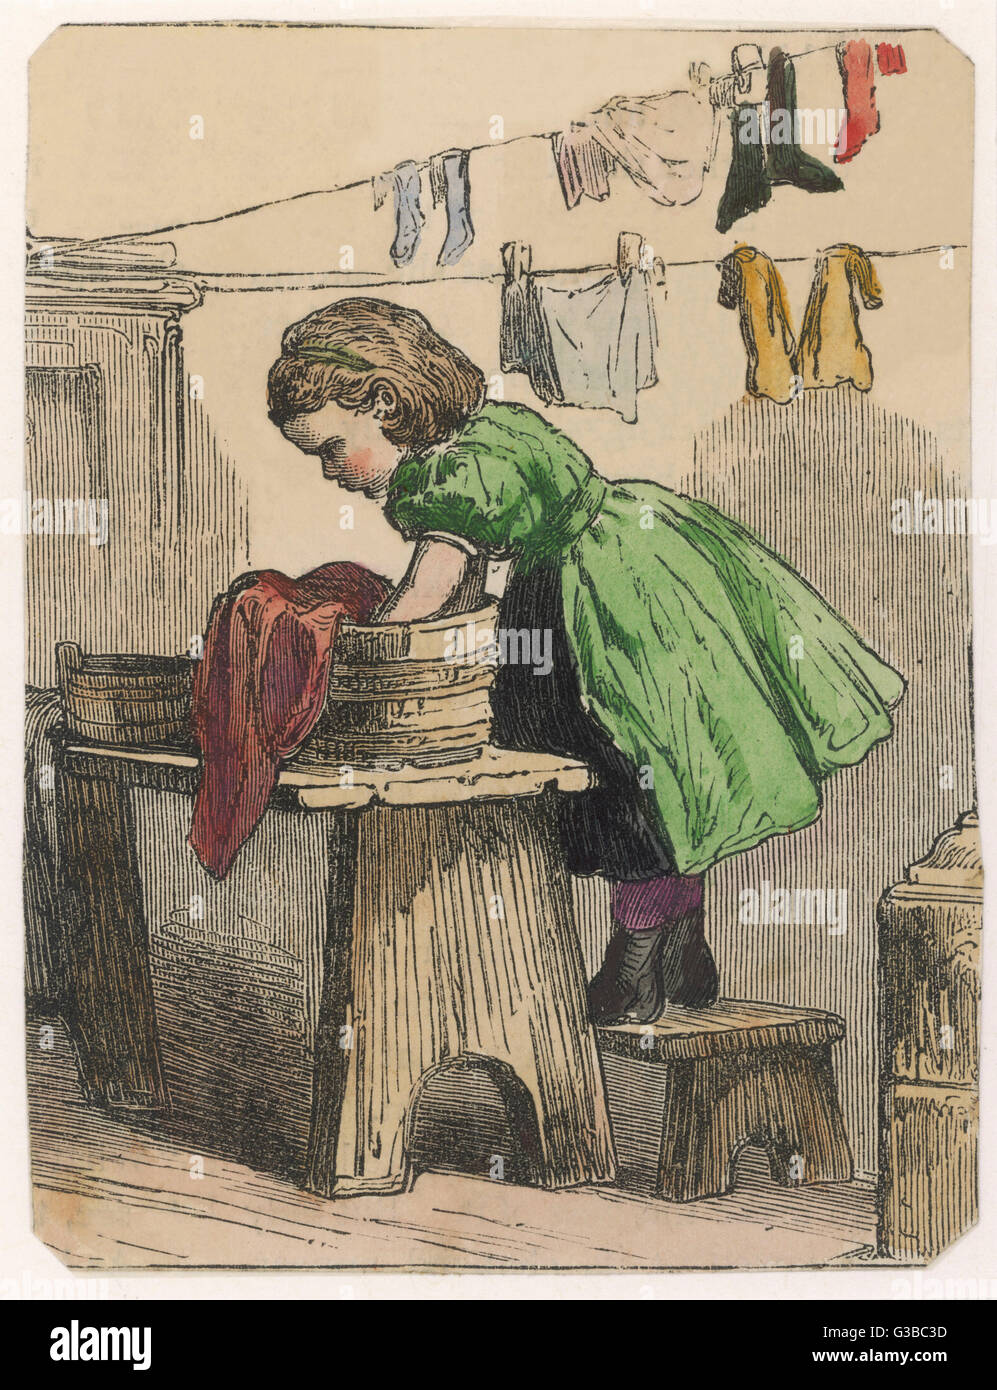 GIRL WASHES CLOTHES 1870 Stock Photo